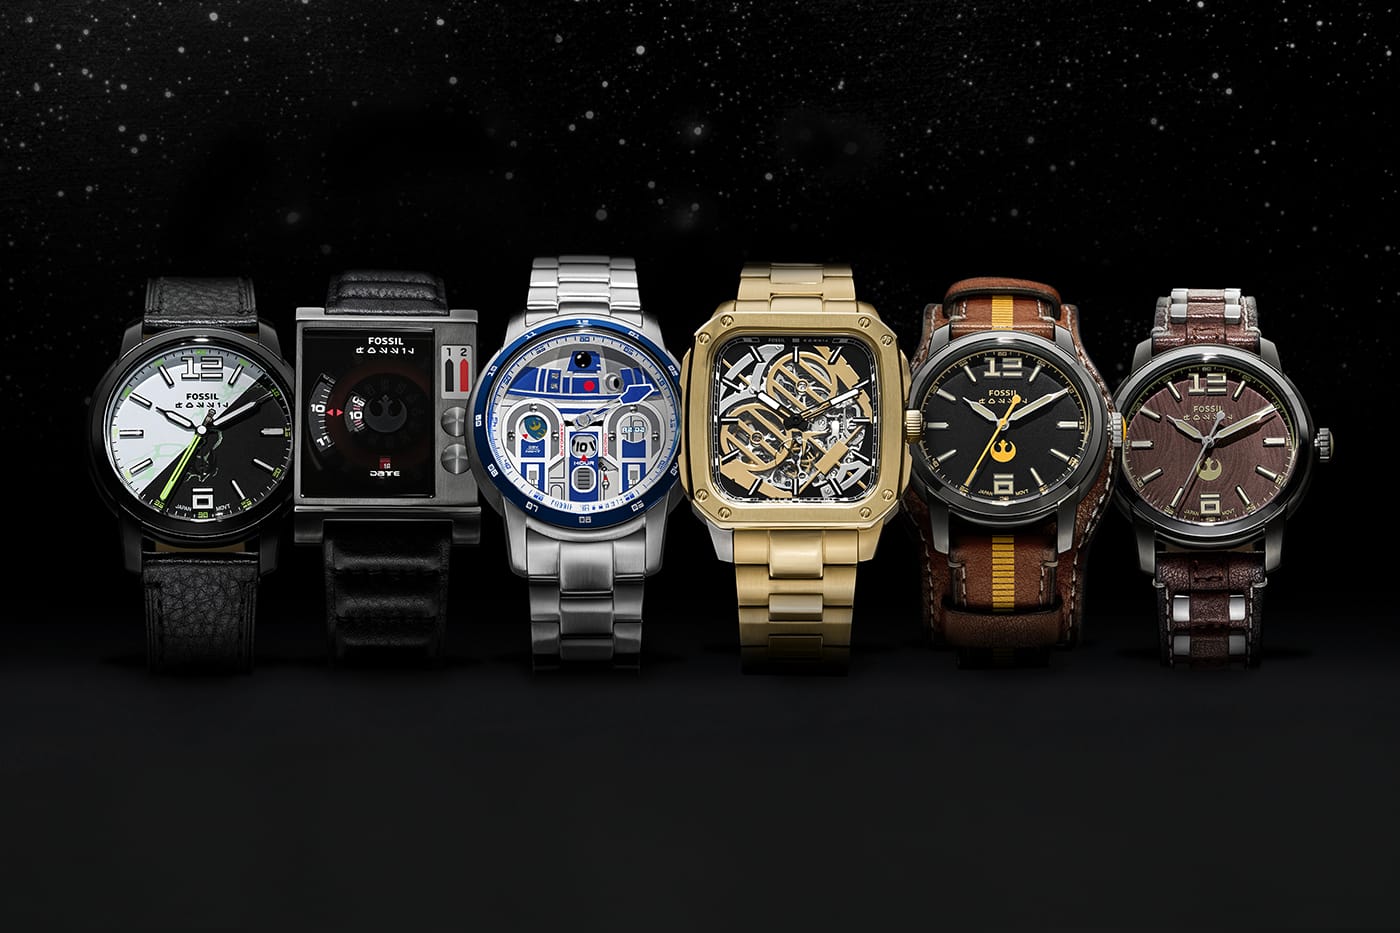 Fossil 'Star Wars' Watch Collaboration Release | Hypebeast